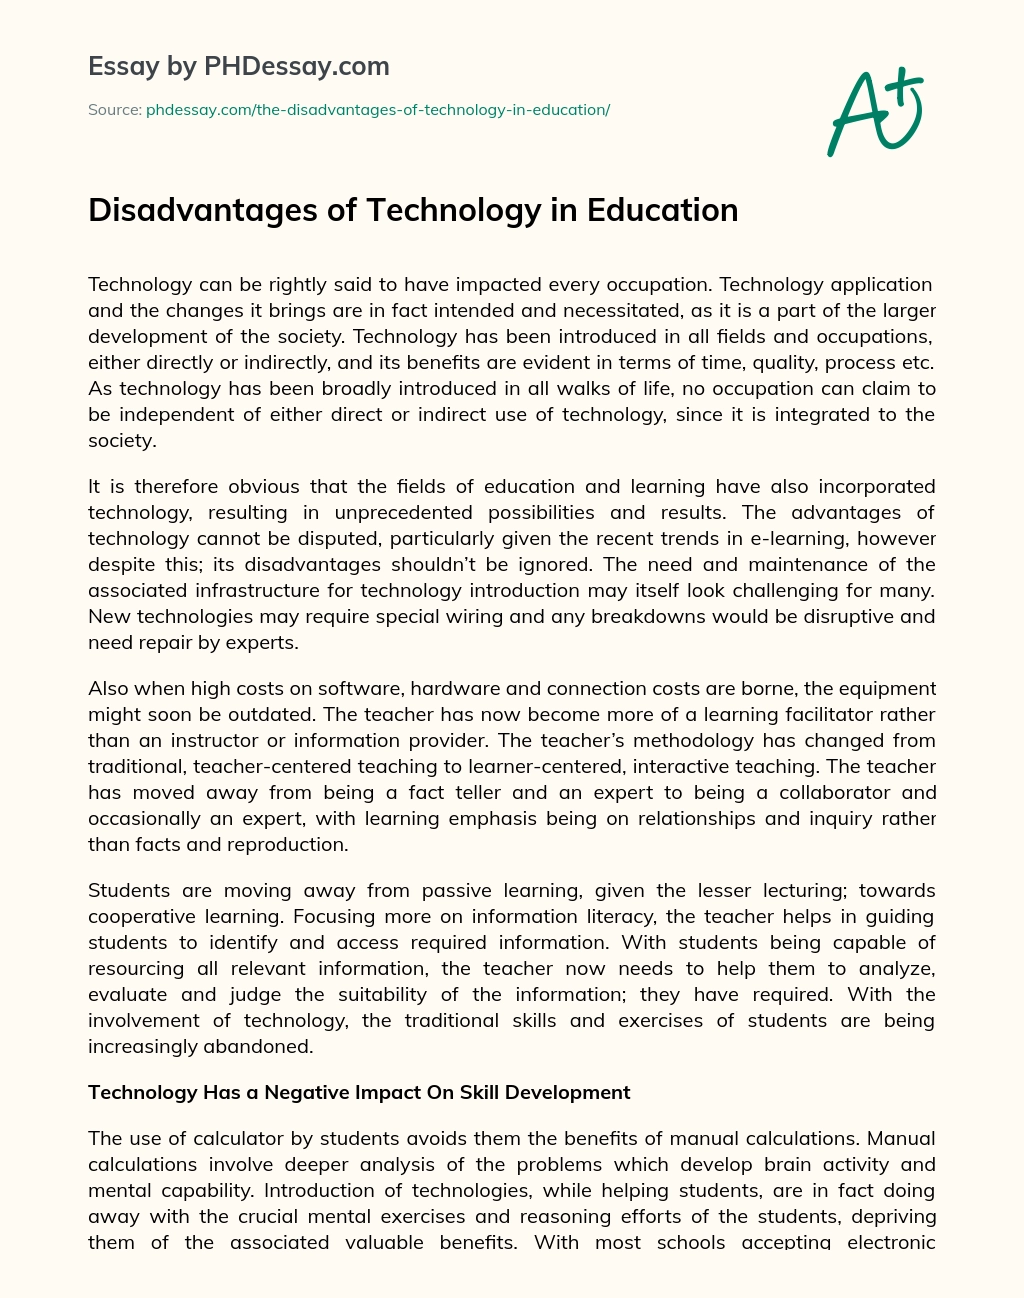 the role of technology in education essay